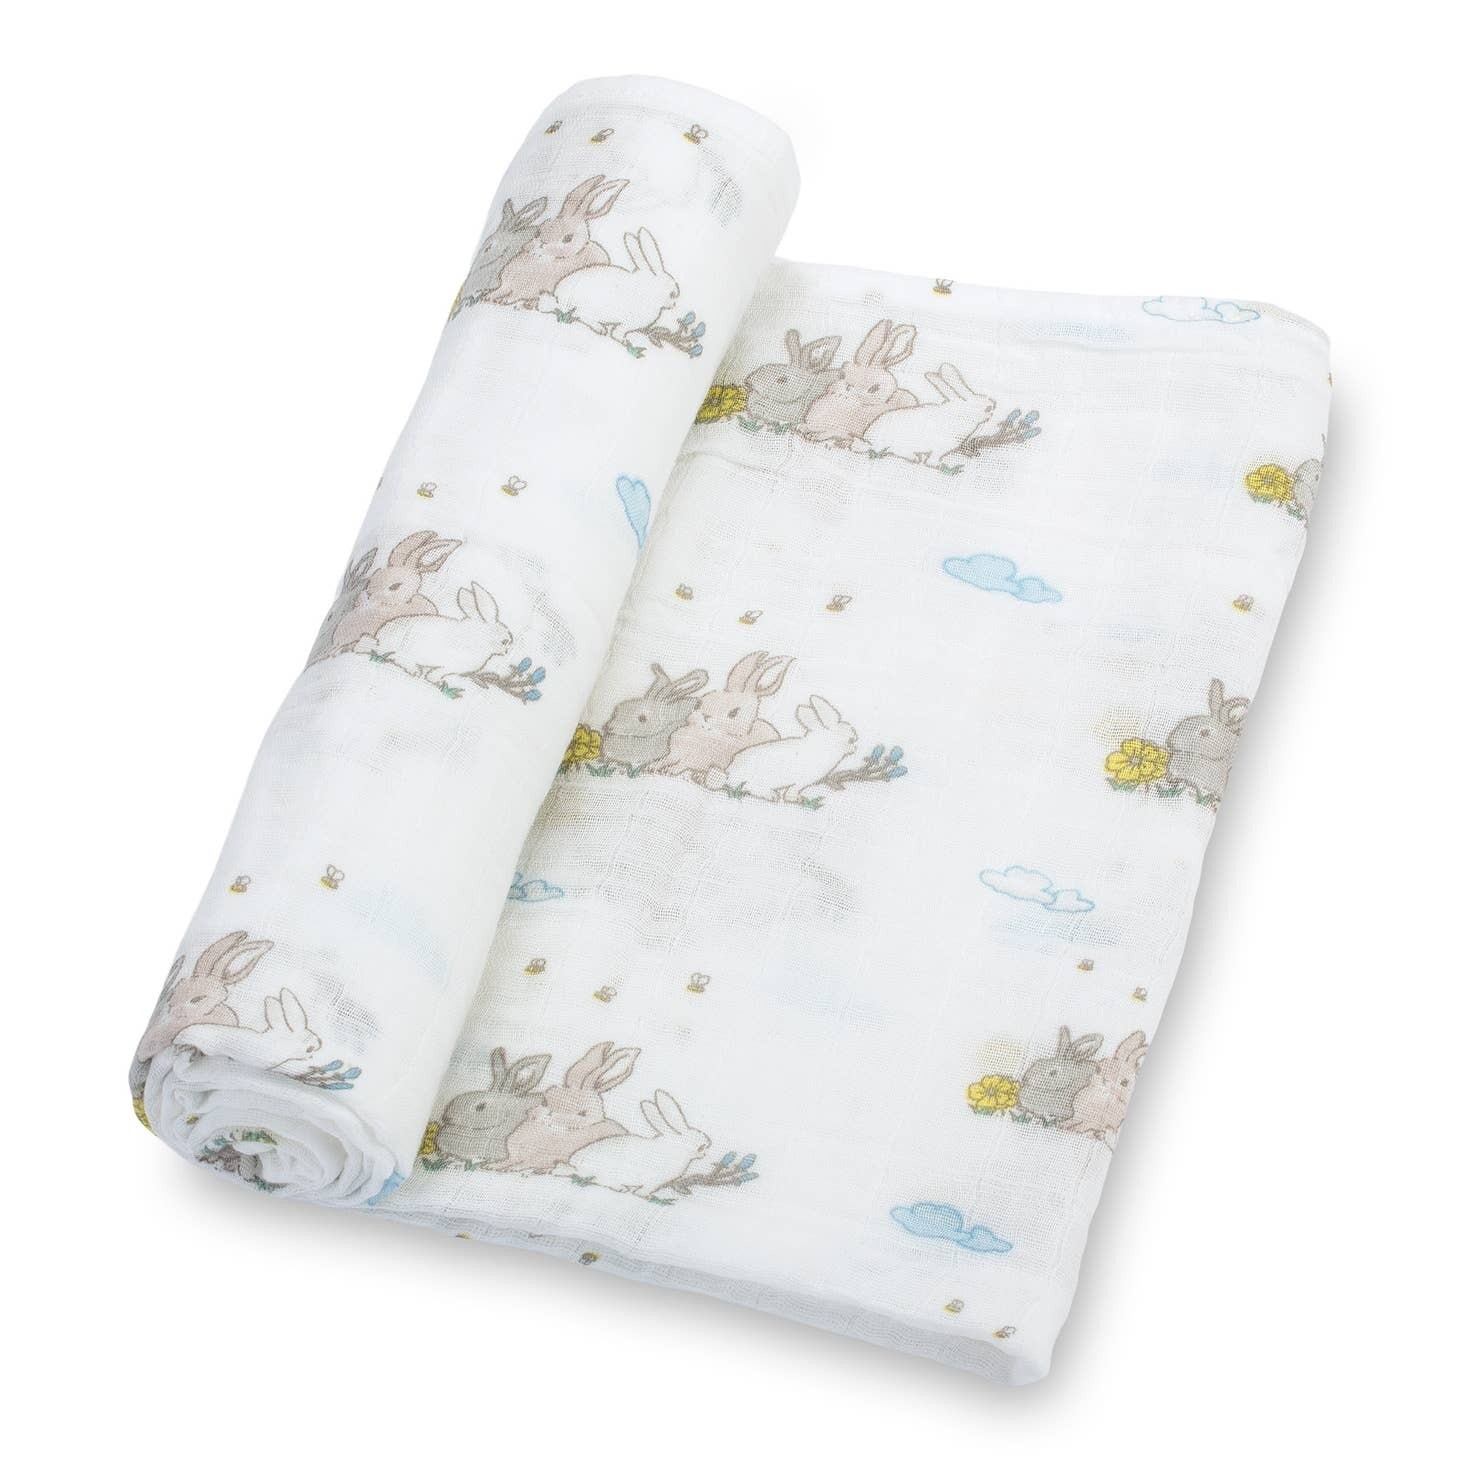 Lolly-Some Bunny Loves You Swaddle